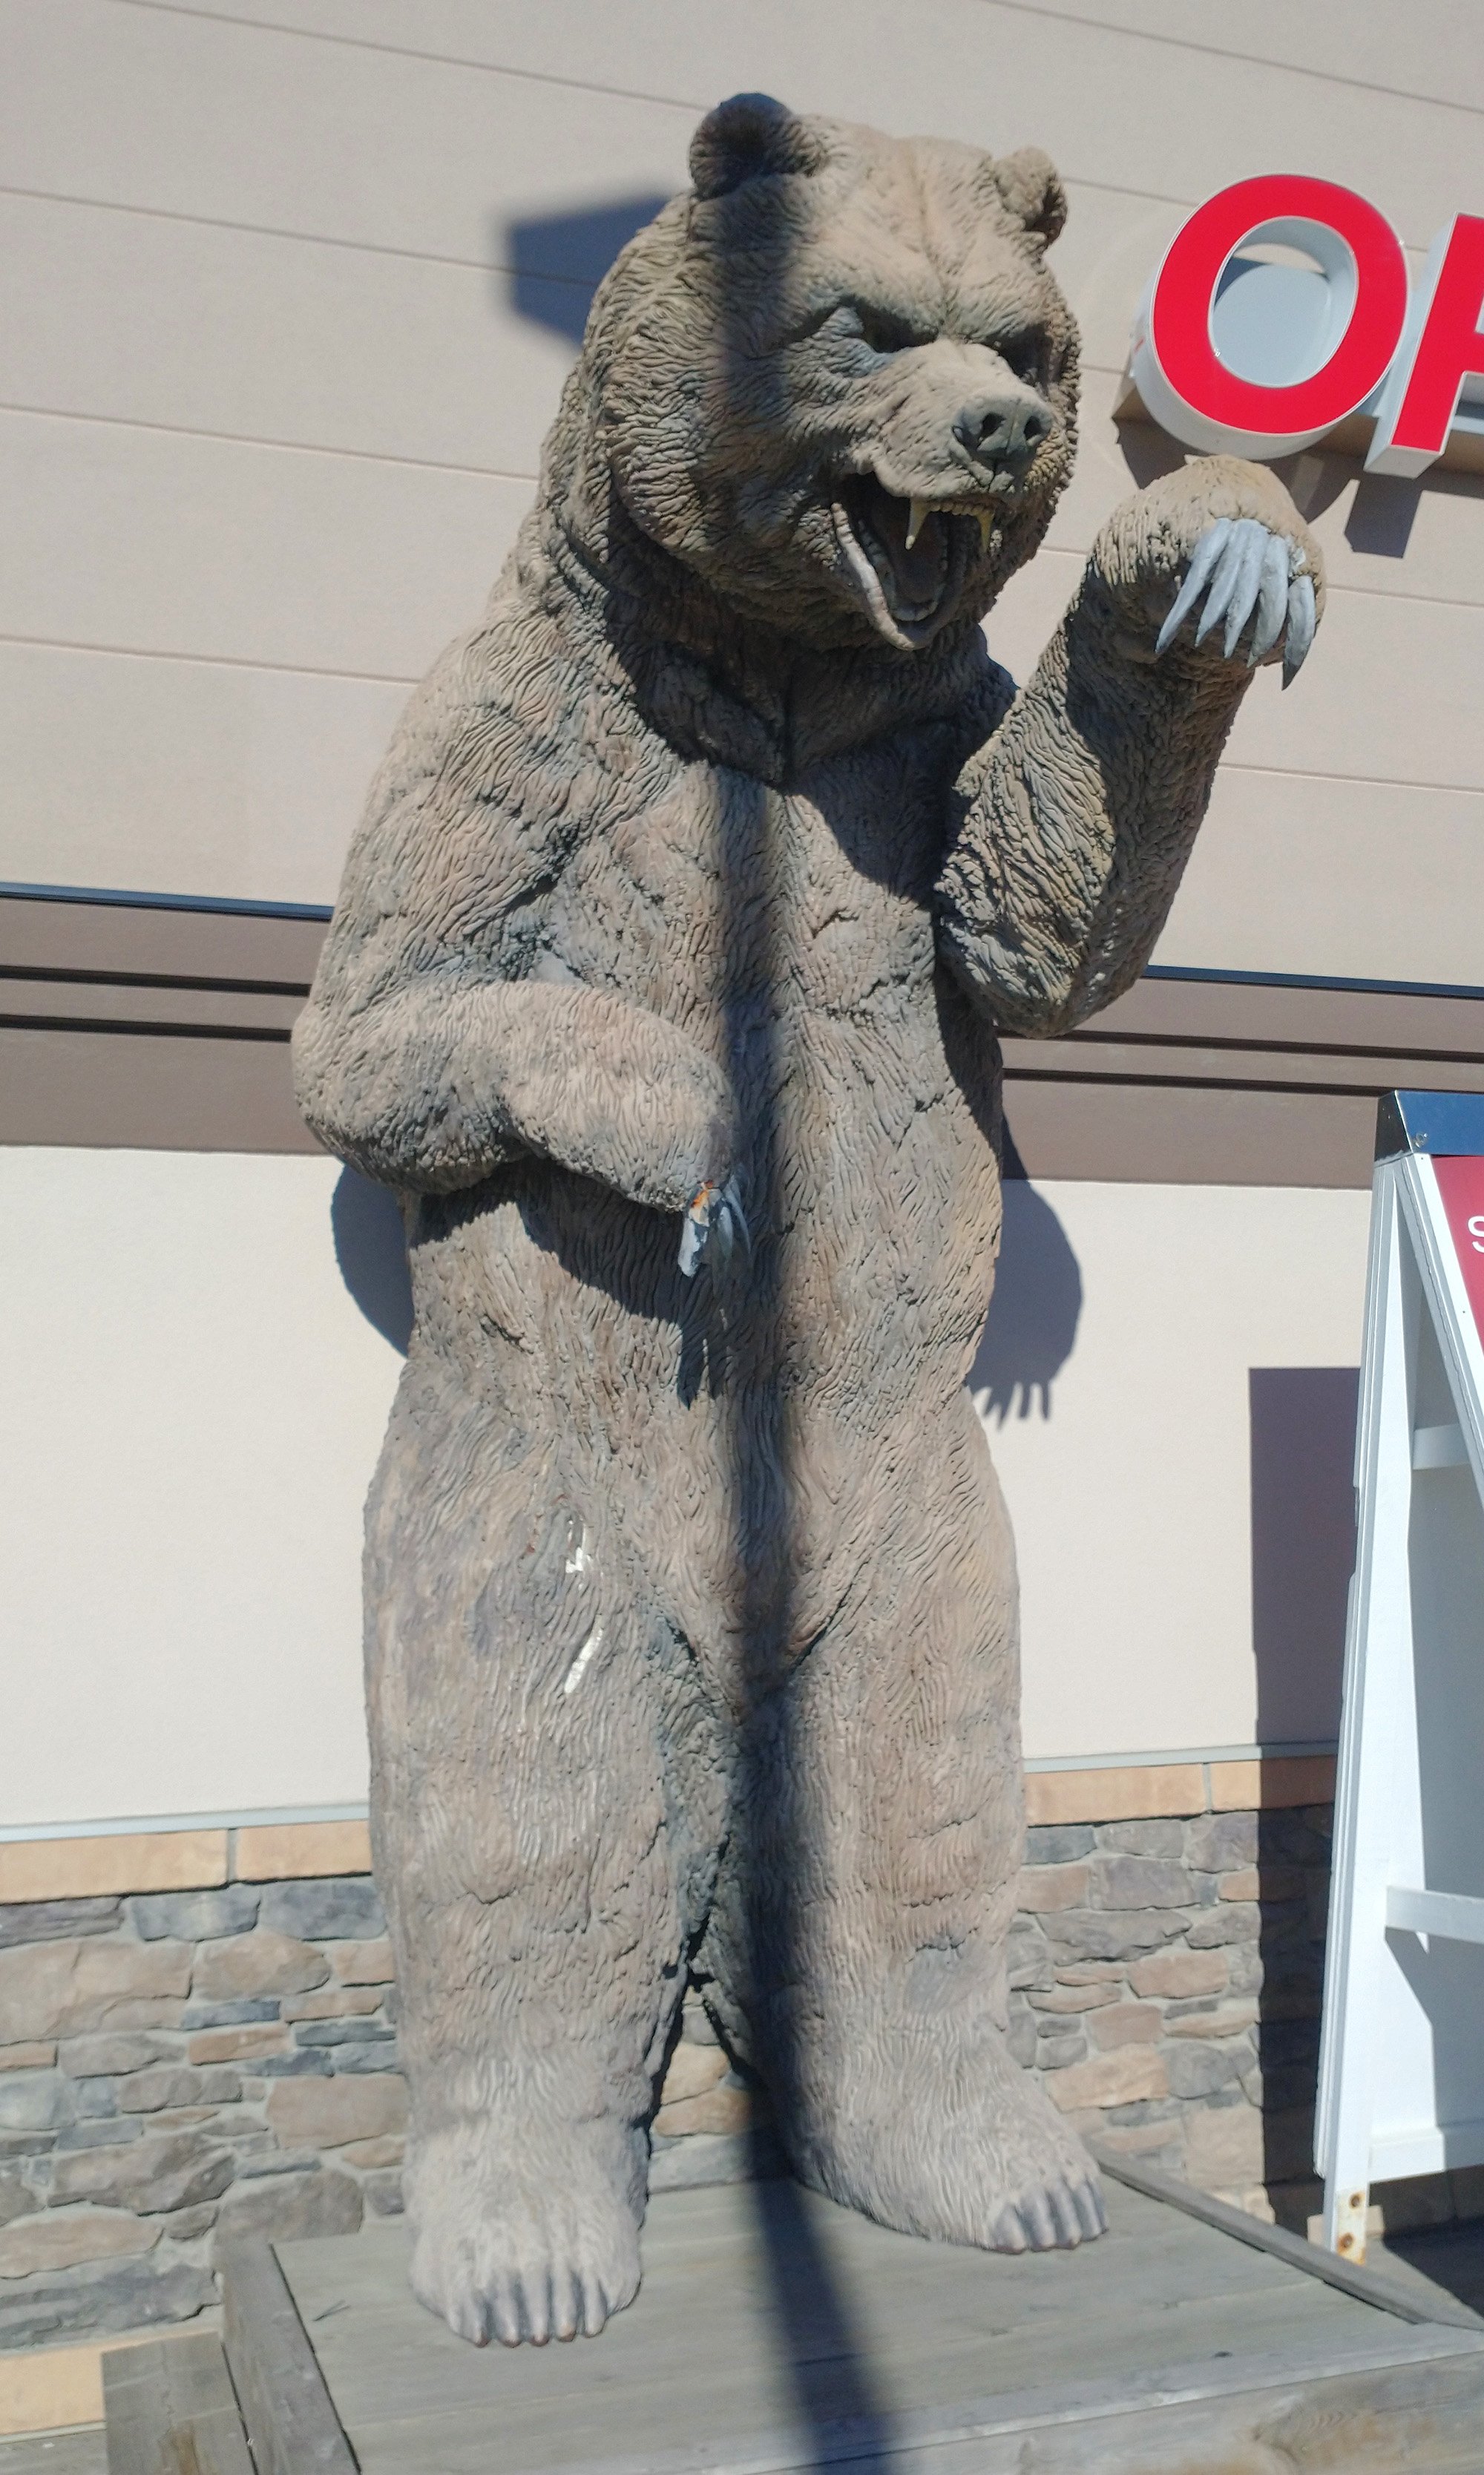 The grocery store there has this badass 7 foot tall Grizzly.